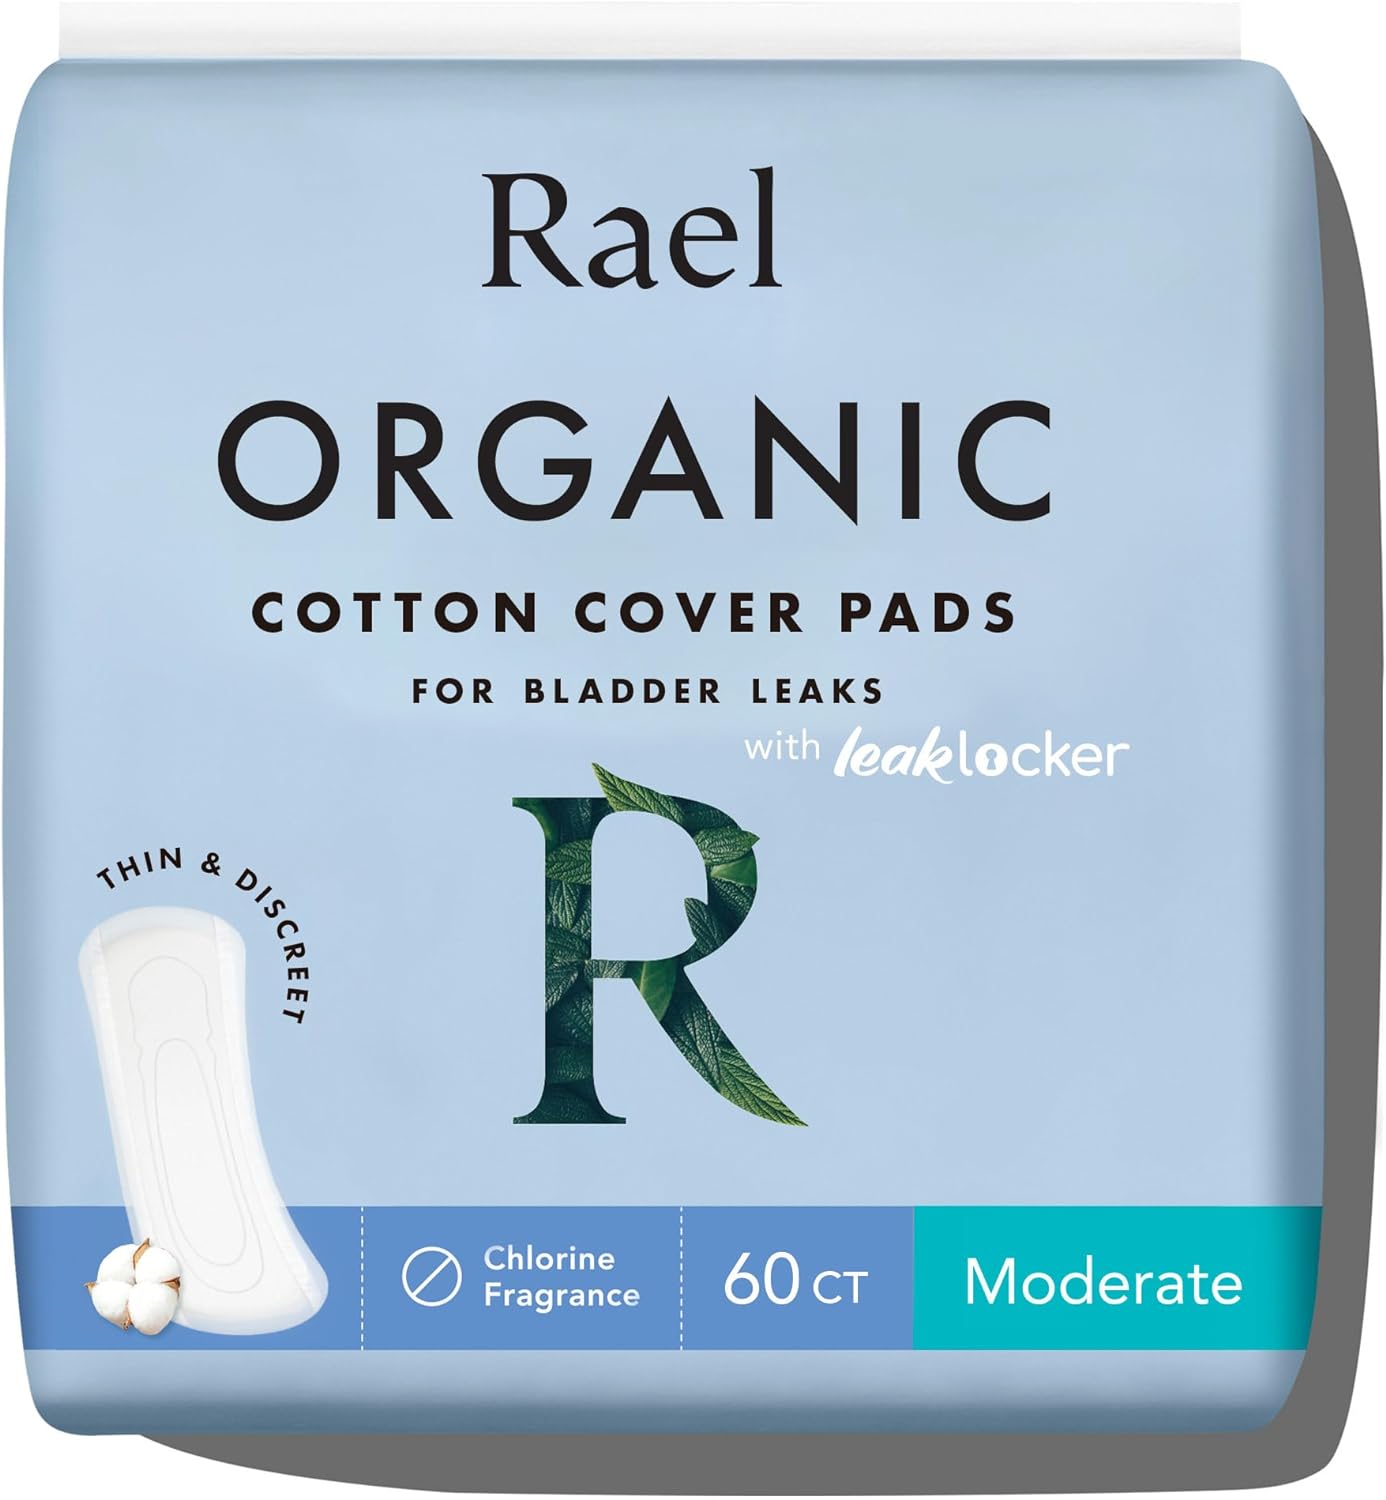 Rael Incontinence Pads for Women, Organic Cotton Cover - Postpartum Essential, Heavy Absorbency, Bladder Leak Control, 4 Layer Core with Leak Guard Technology, Long Length (Moderate, 60 Count)